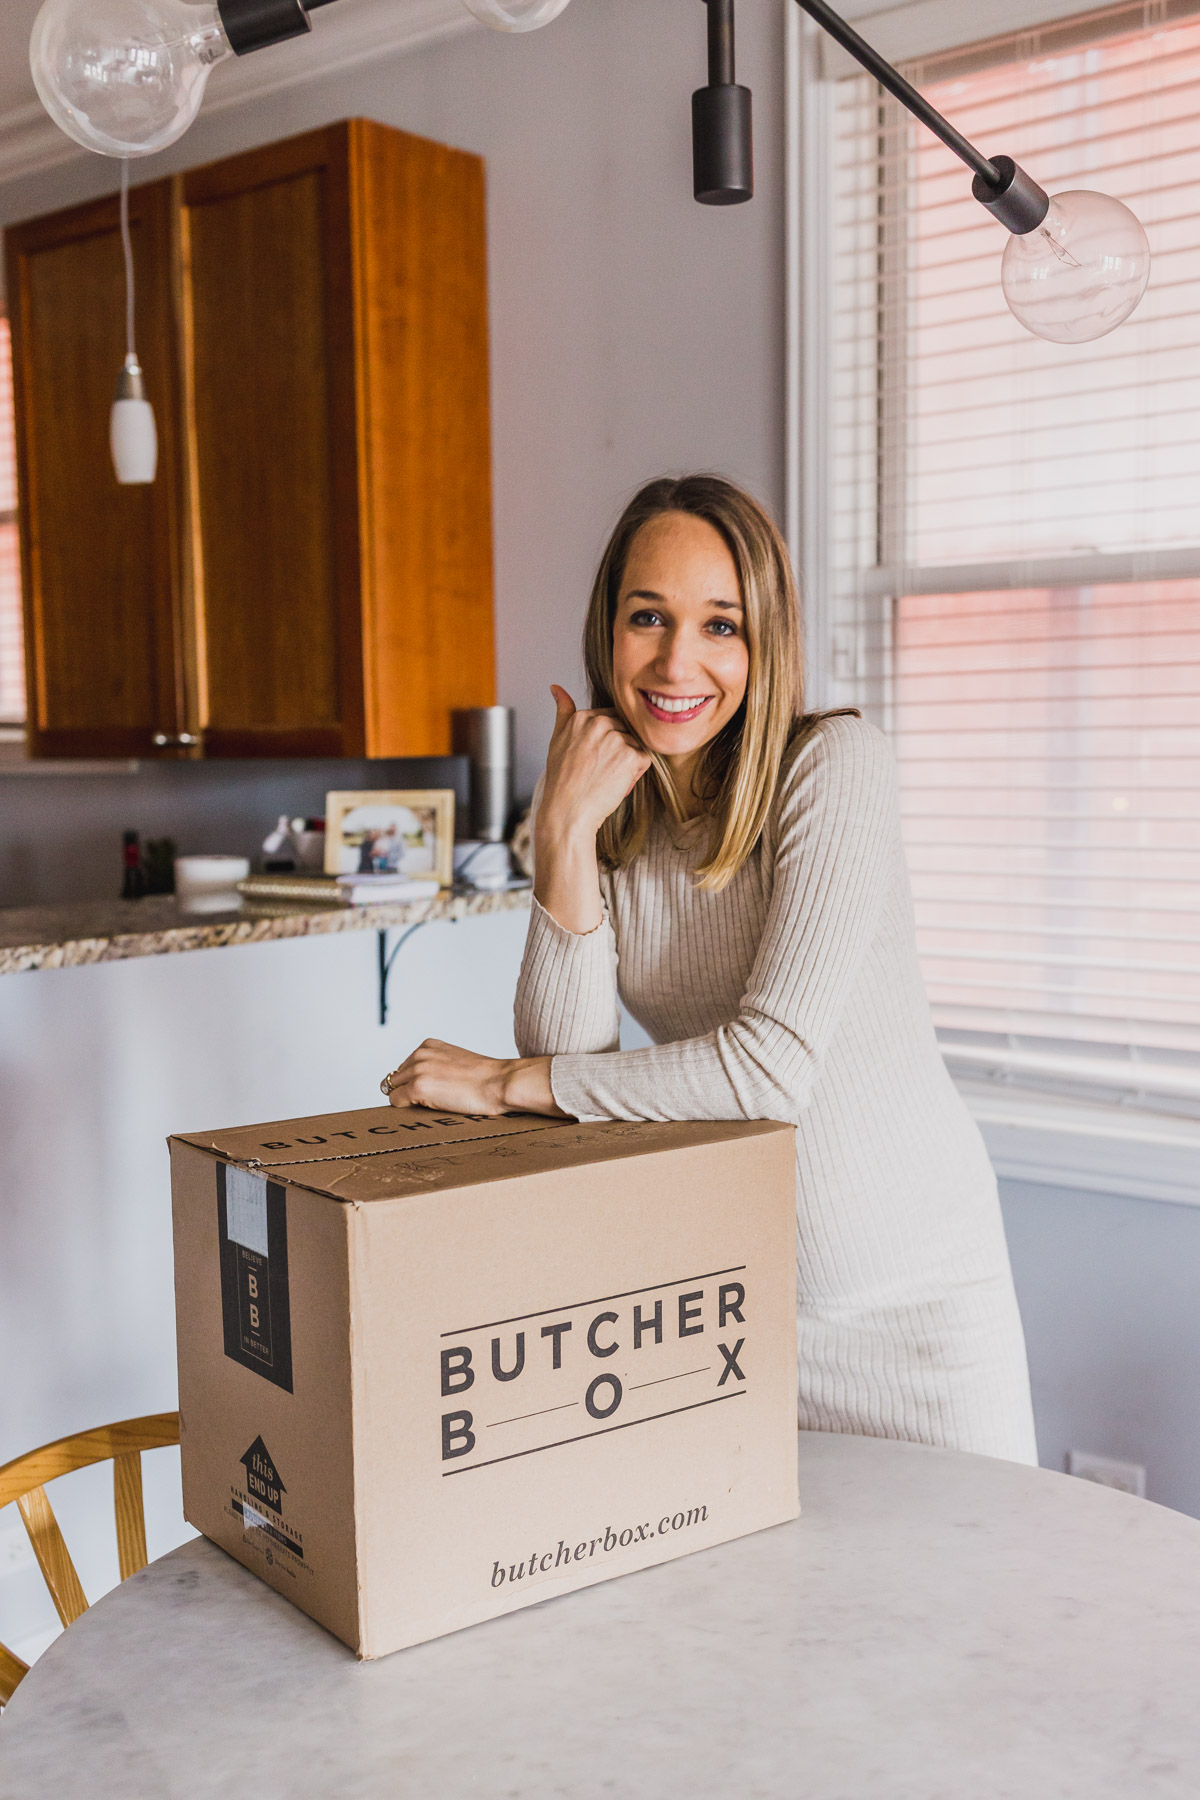 Butcherbox meat delivery review